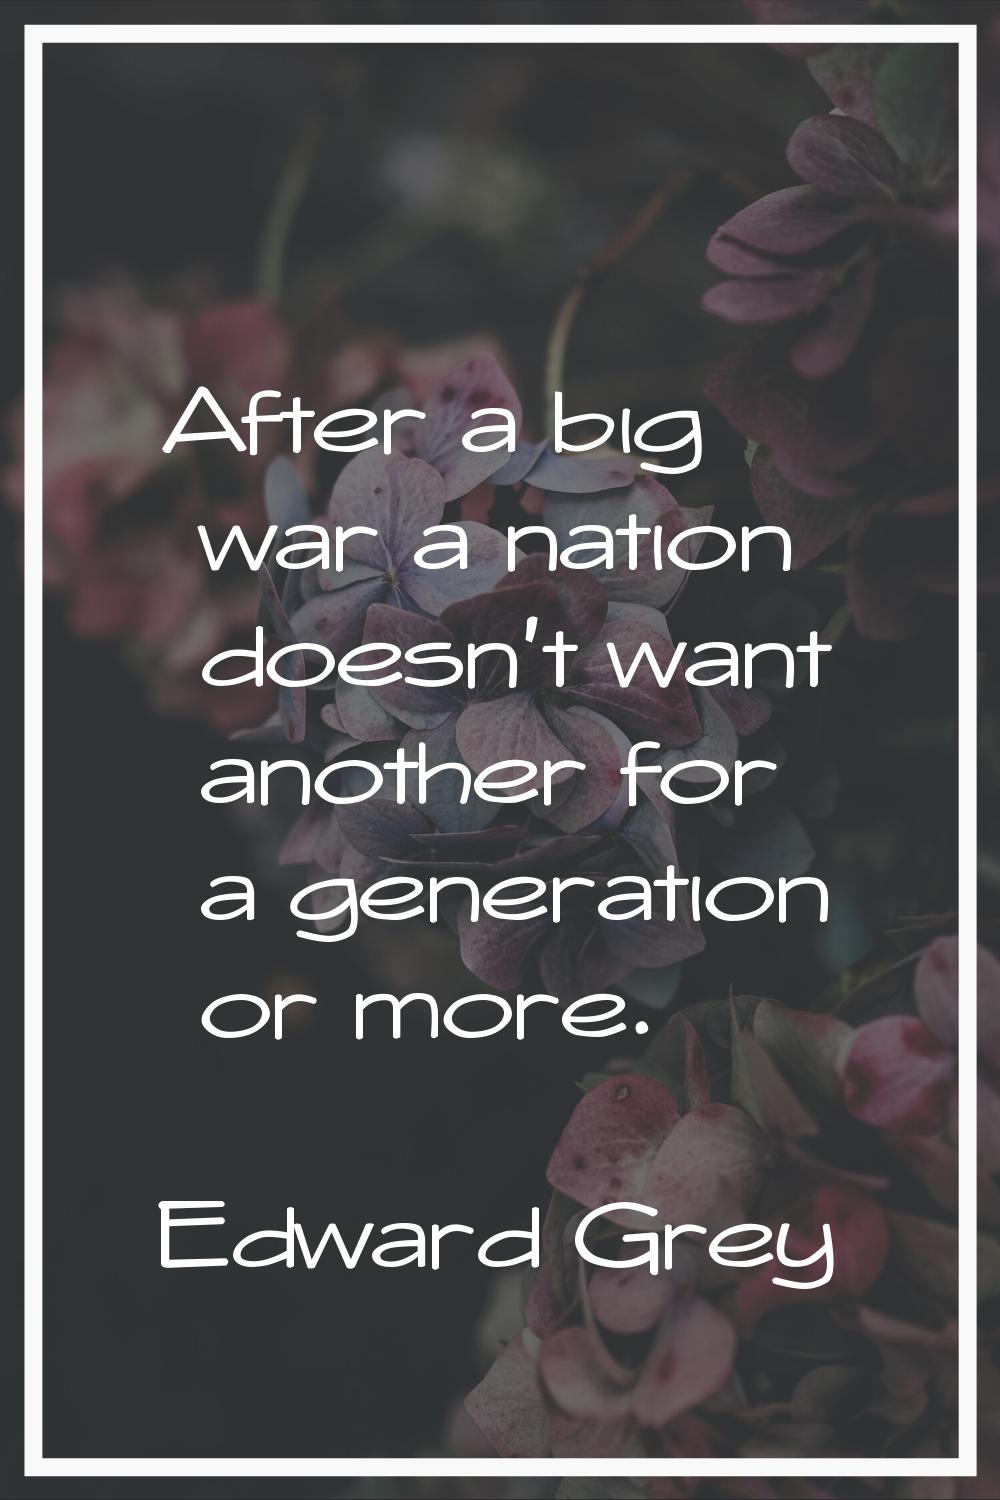 After a big war a nation doesn't want another for a generation or more.